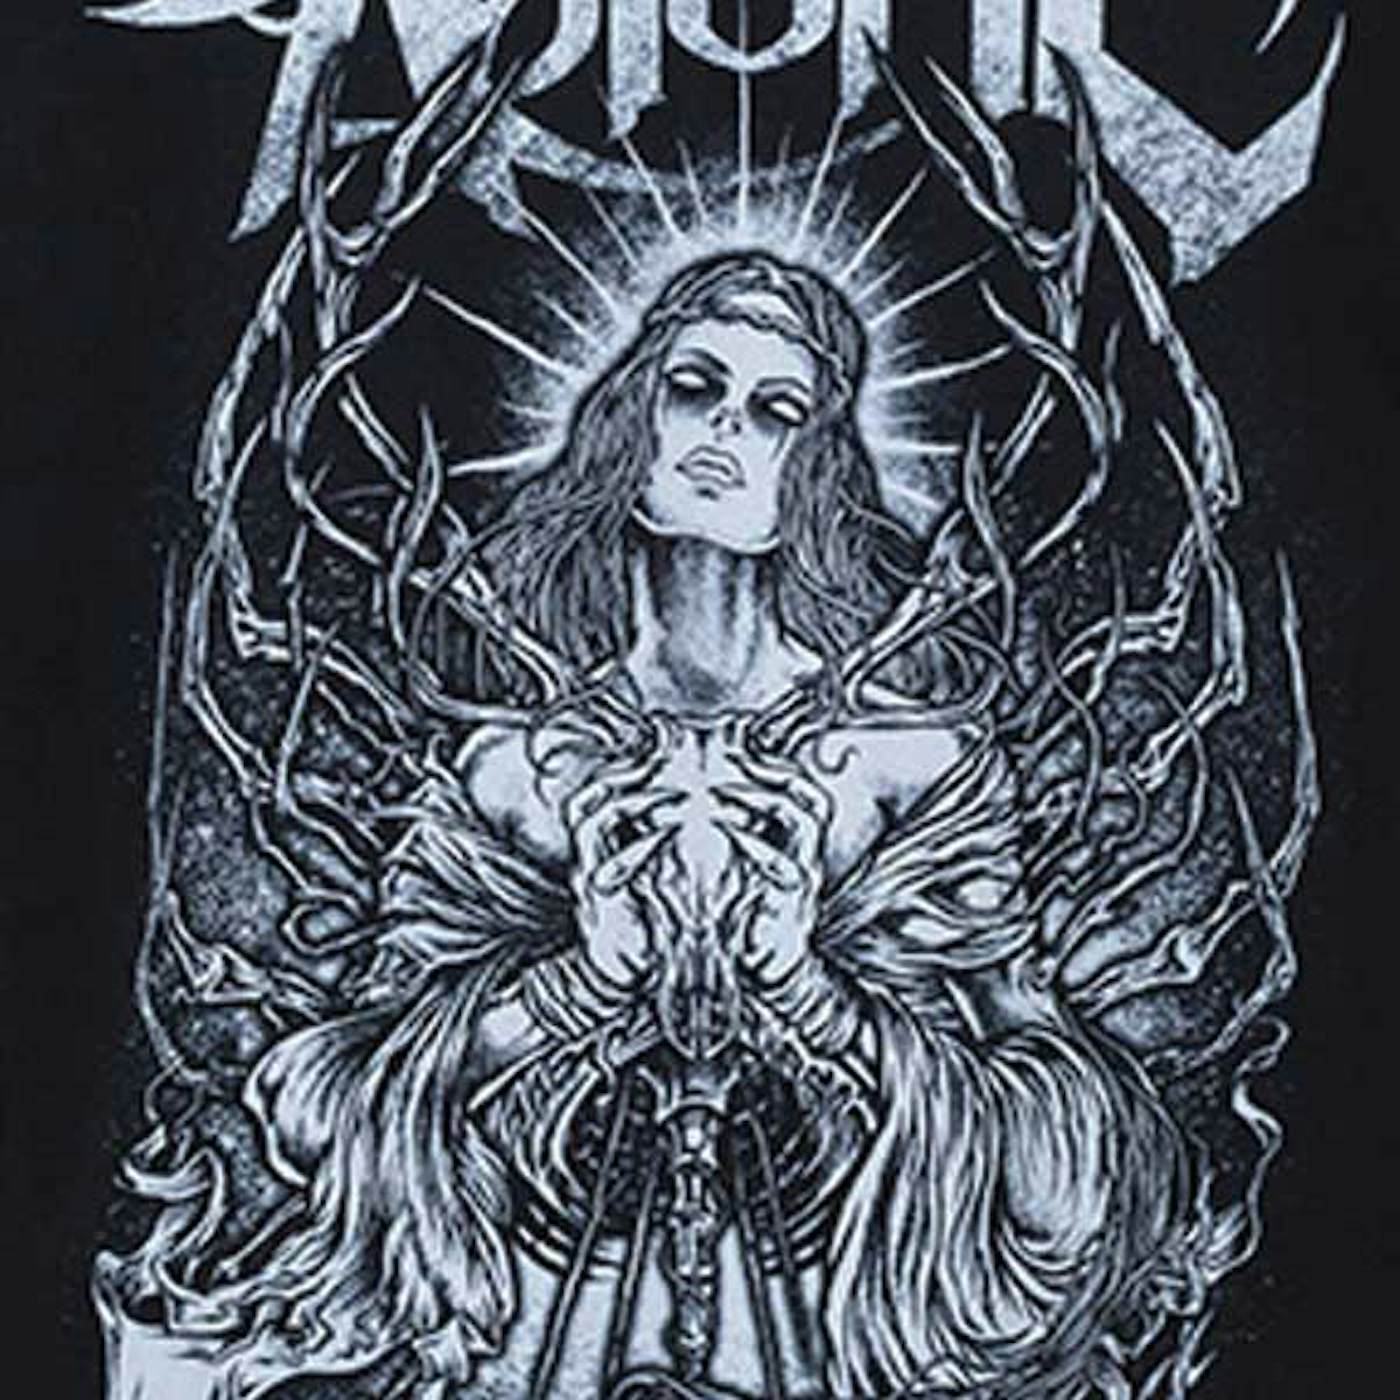 Abiotic "The Absence of Purity" T-Shirt